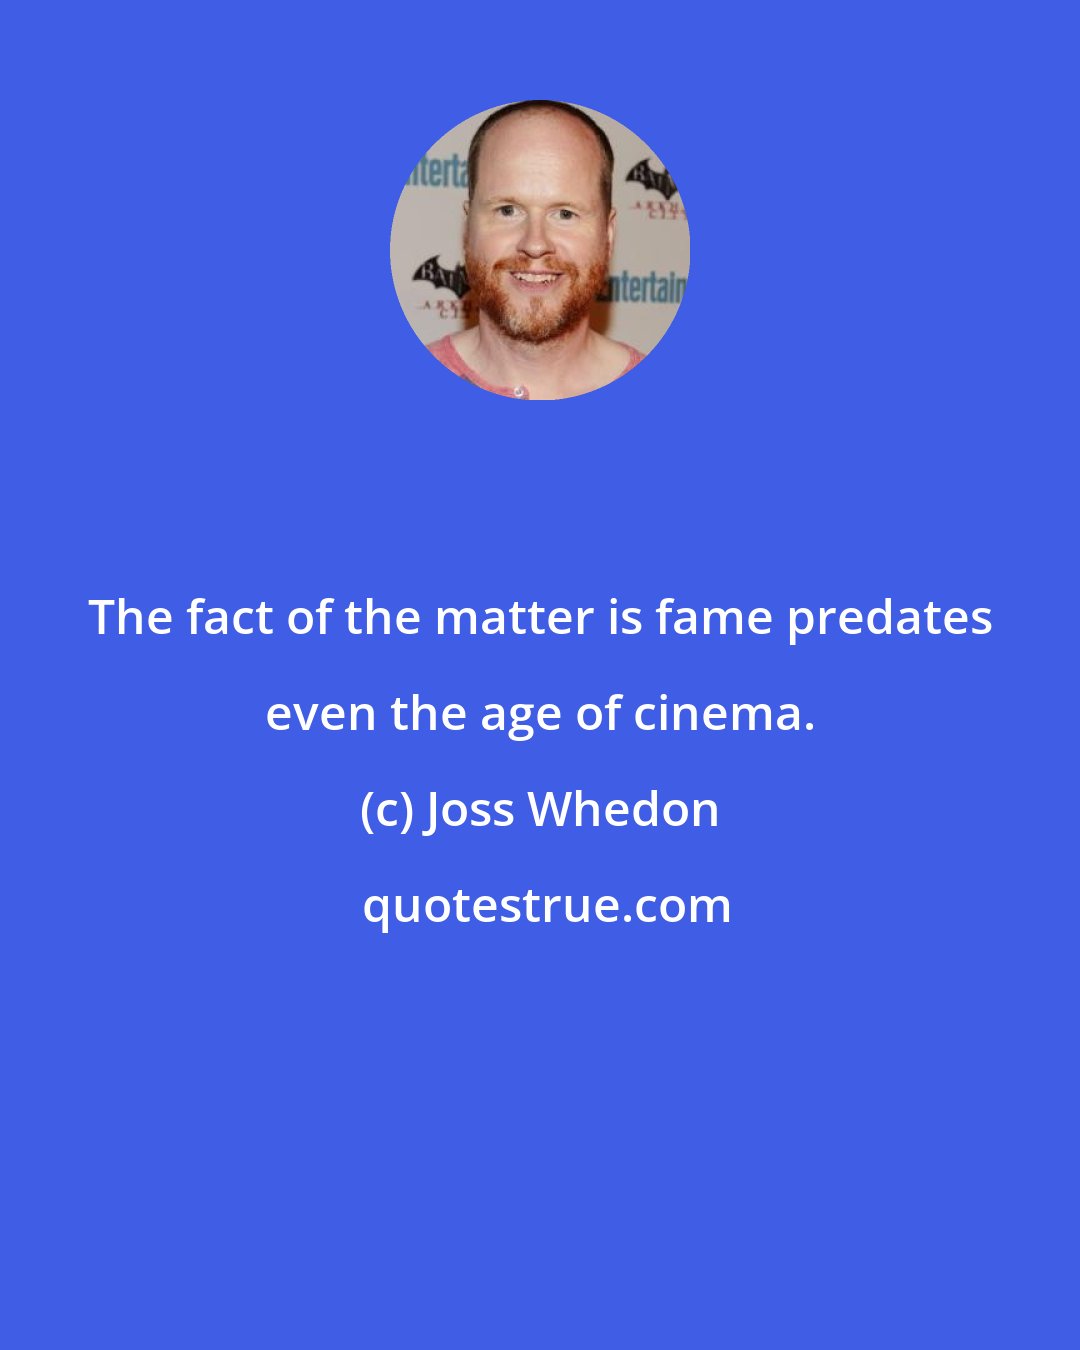 Joss Whedon: The fact of the matter is fame predates even the age of cinema.